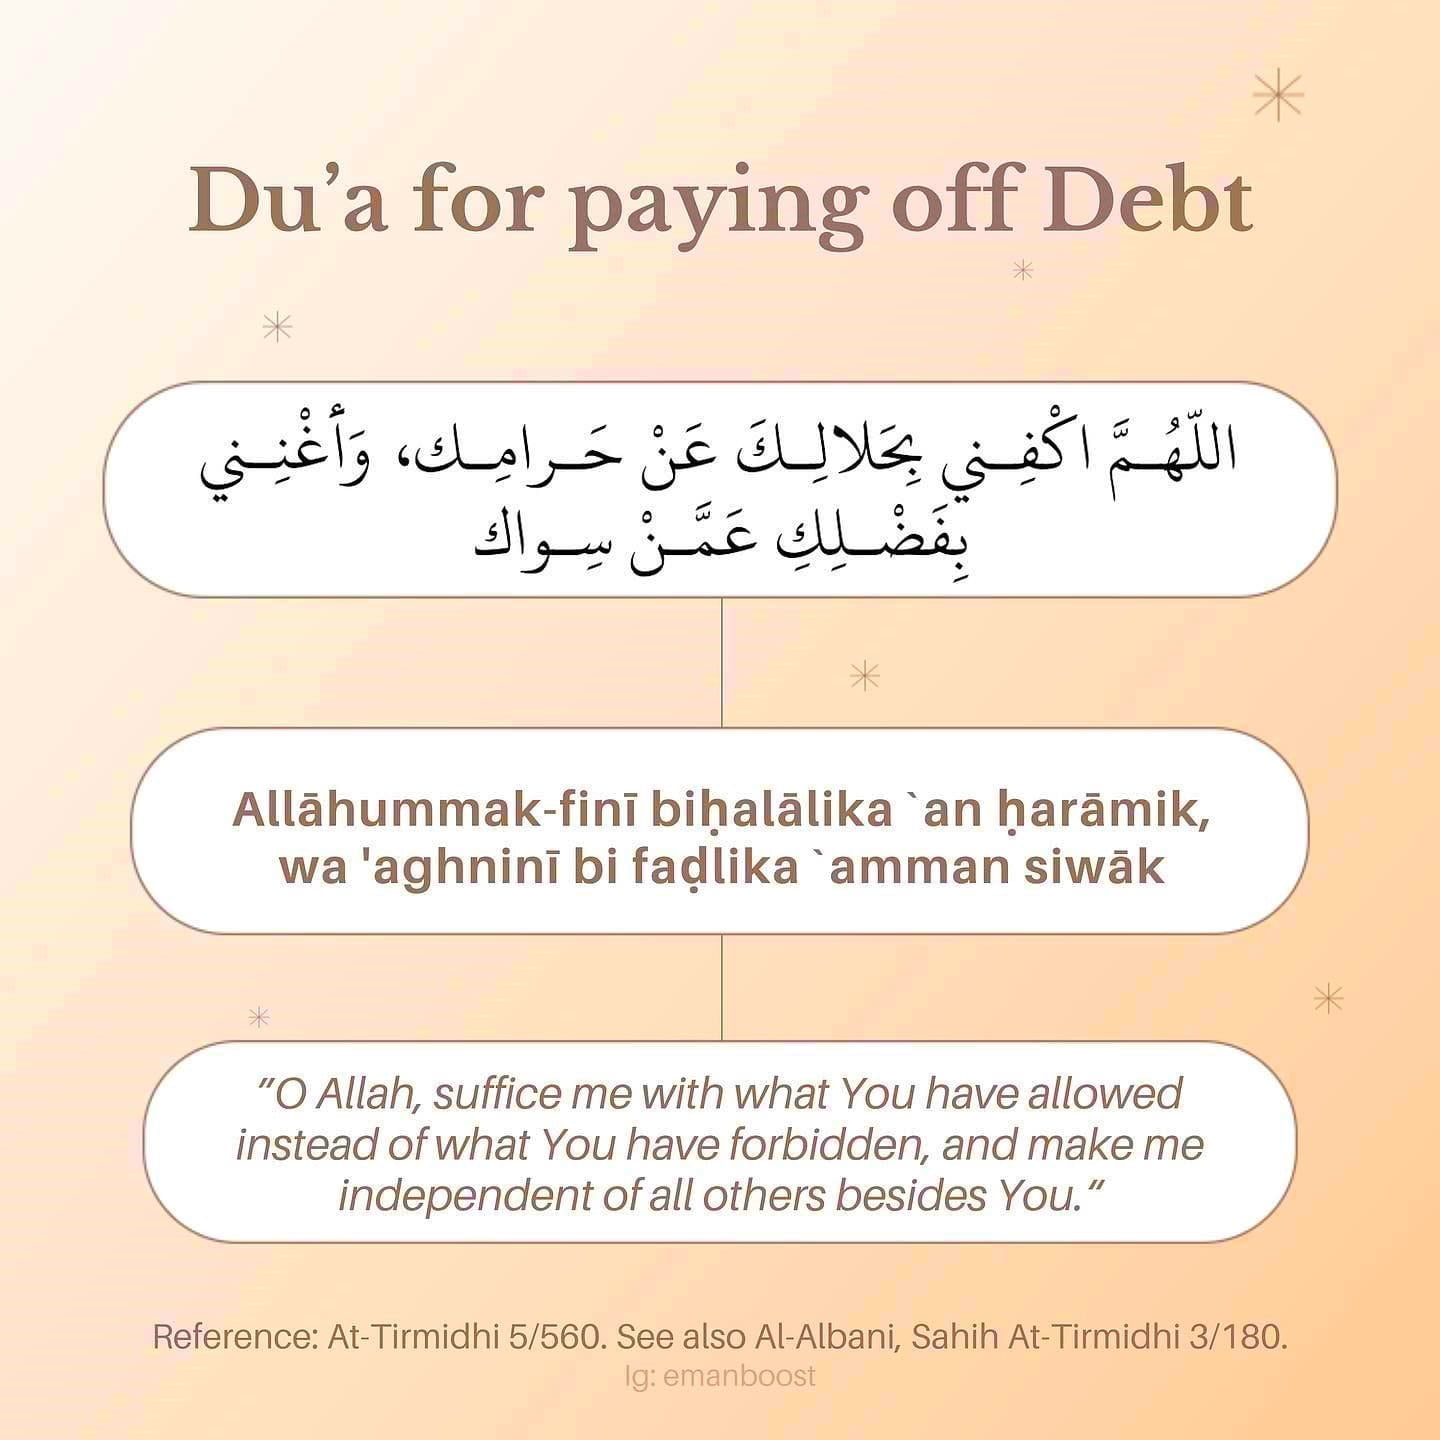 dua for paying off debts fast